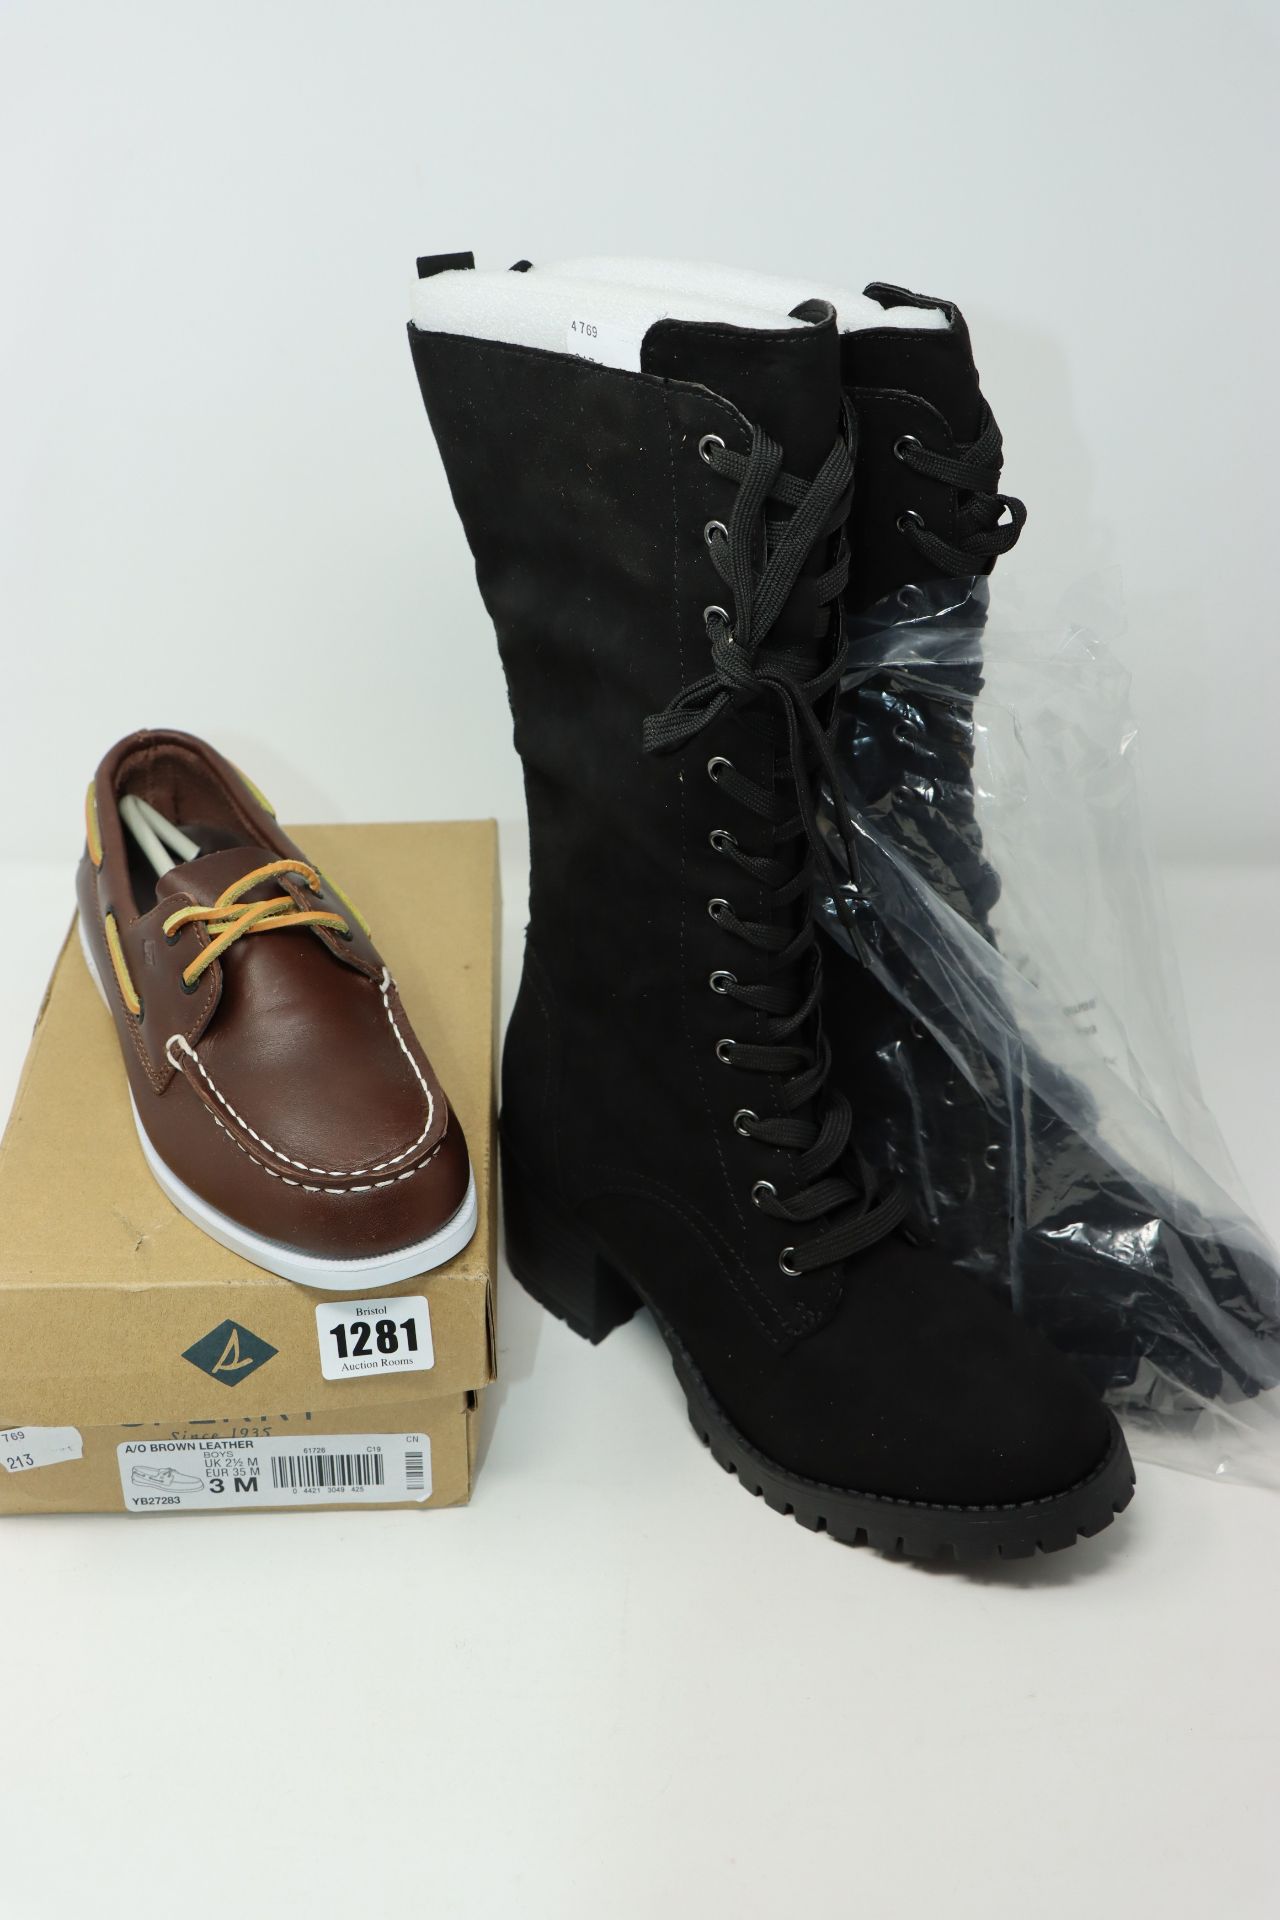 One as new Bamboo Chief 17 Edgy Lace-Up Combat Boots size 35 (No box). One as new Sperry Big Kid's